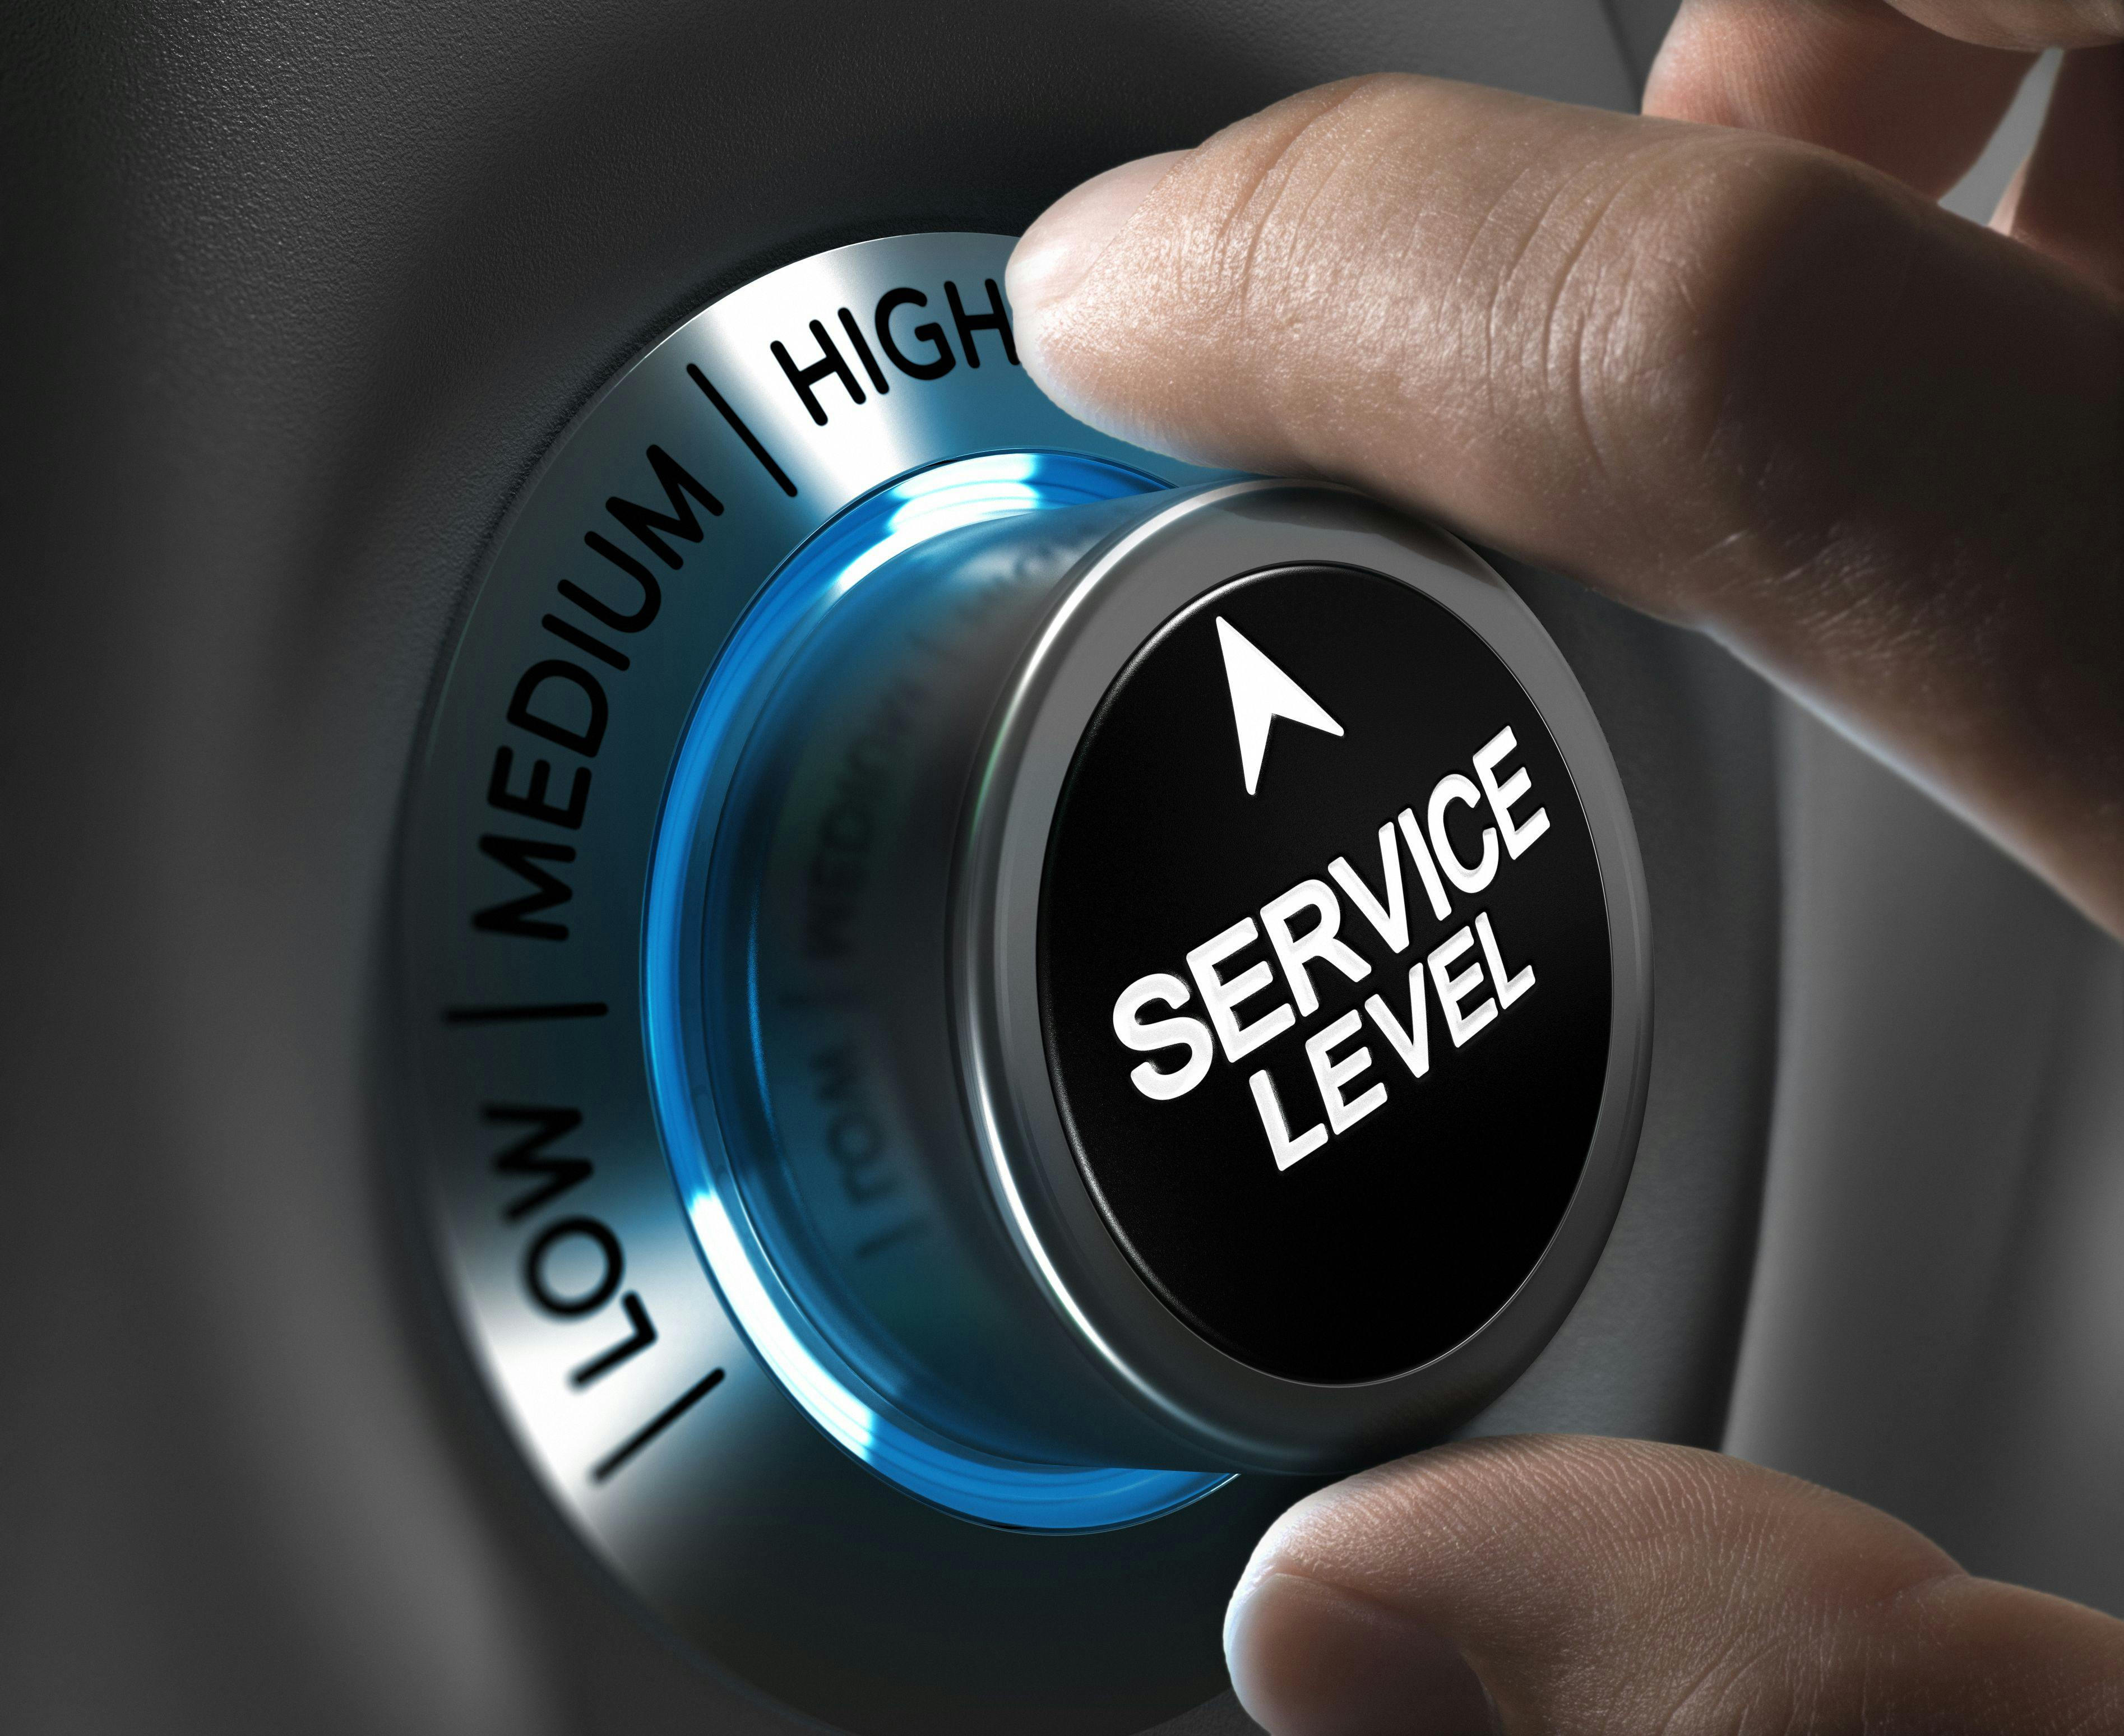 Customer Service Portals and Their Value to Your Business